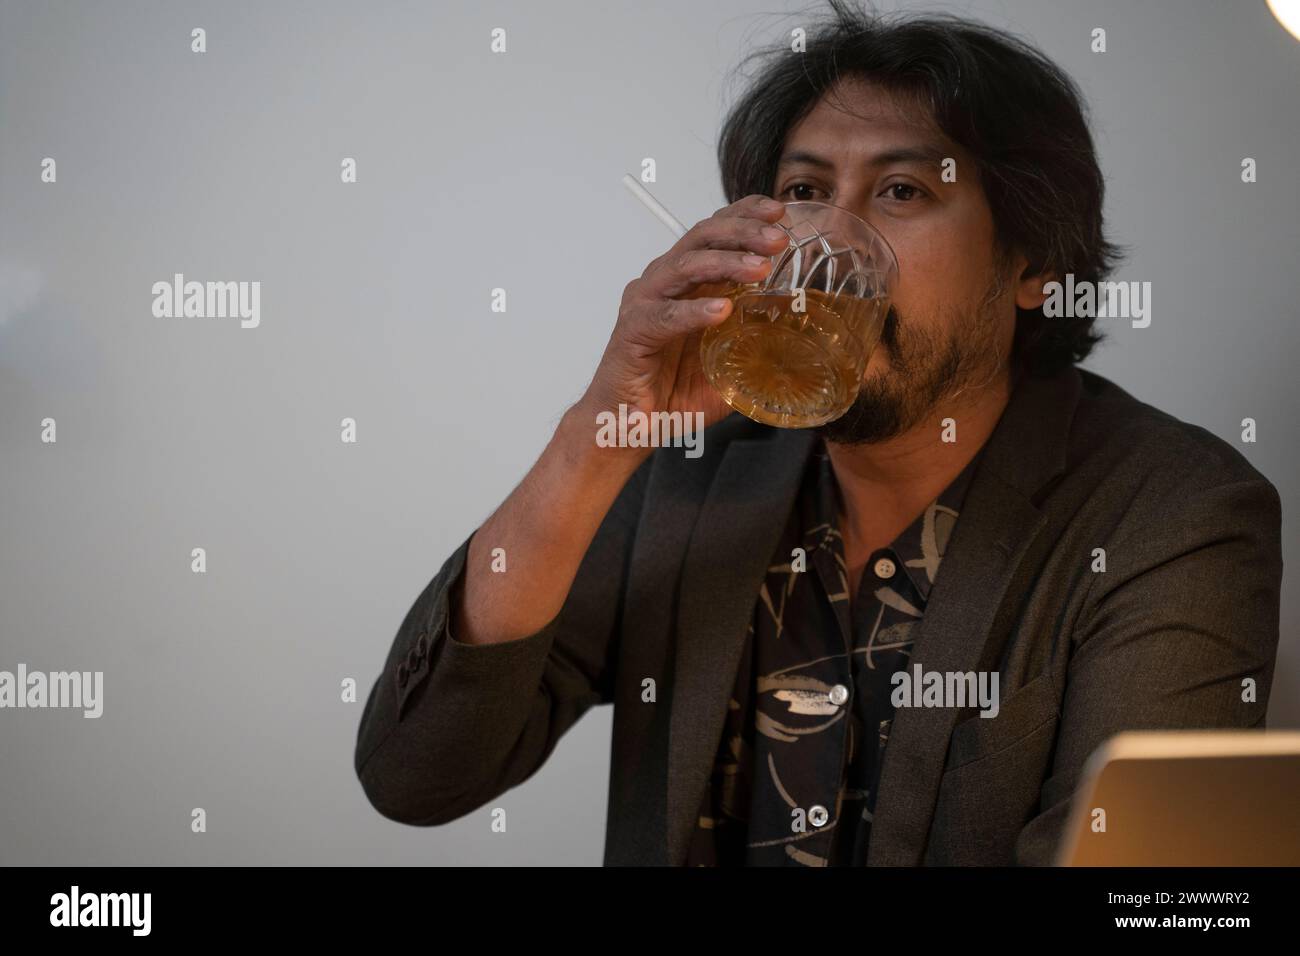 A man is tired of running an unsuccessful business by drinking. Stock Photo